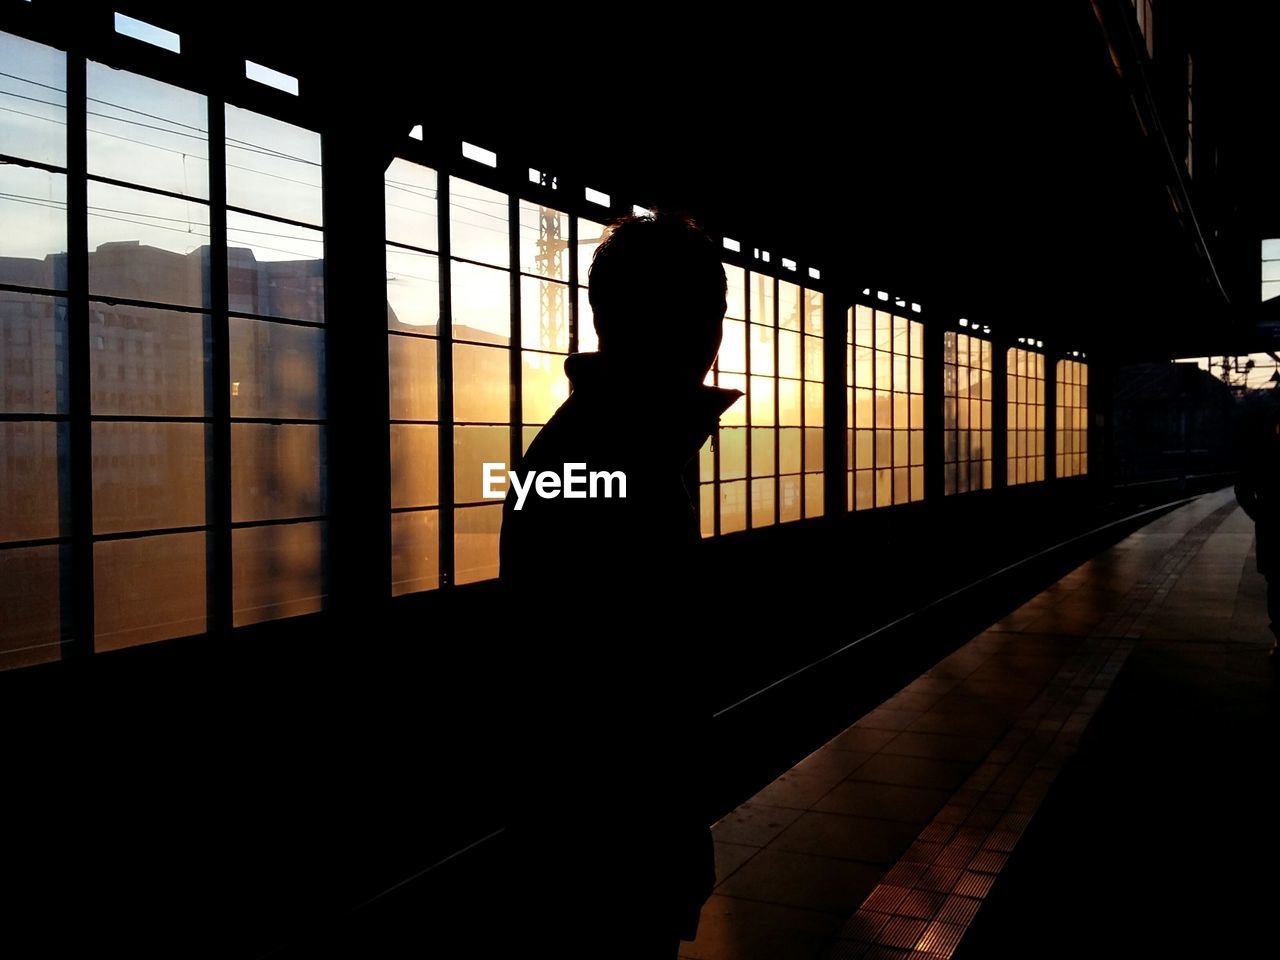 Silhouette man standing in railroad station during sunset